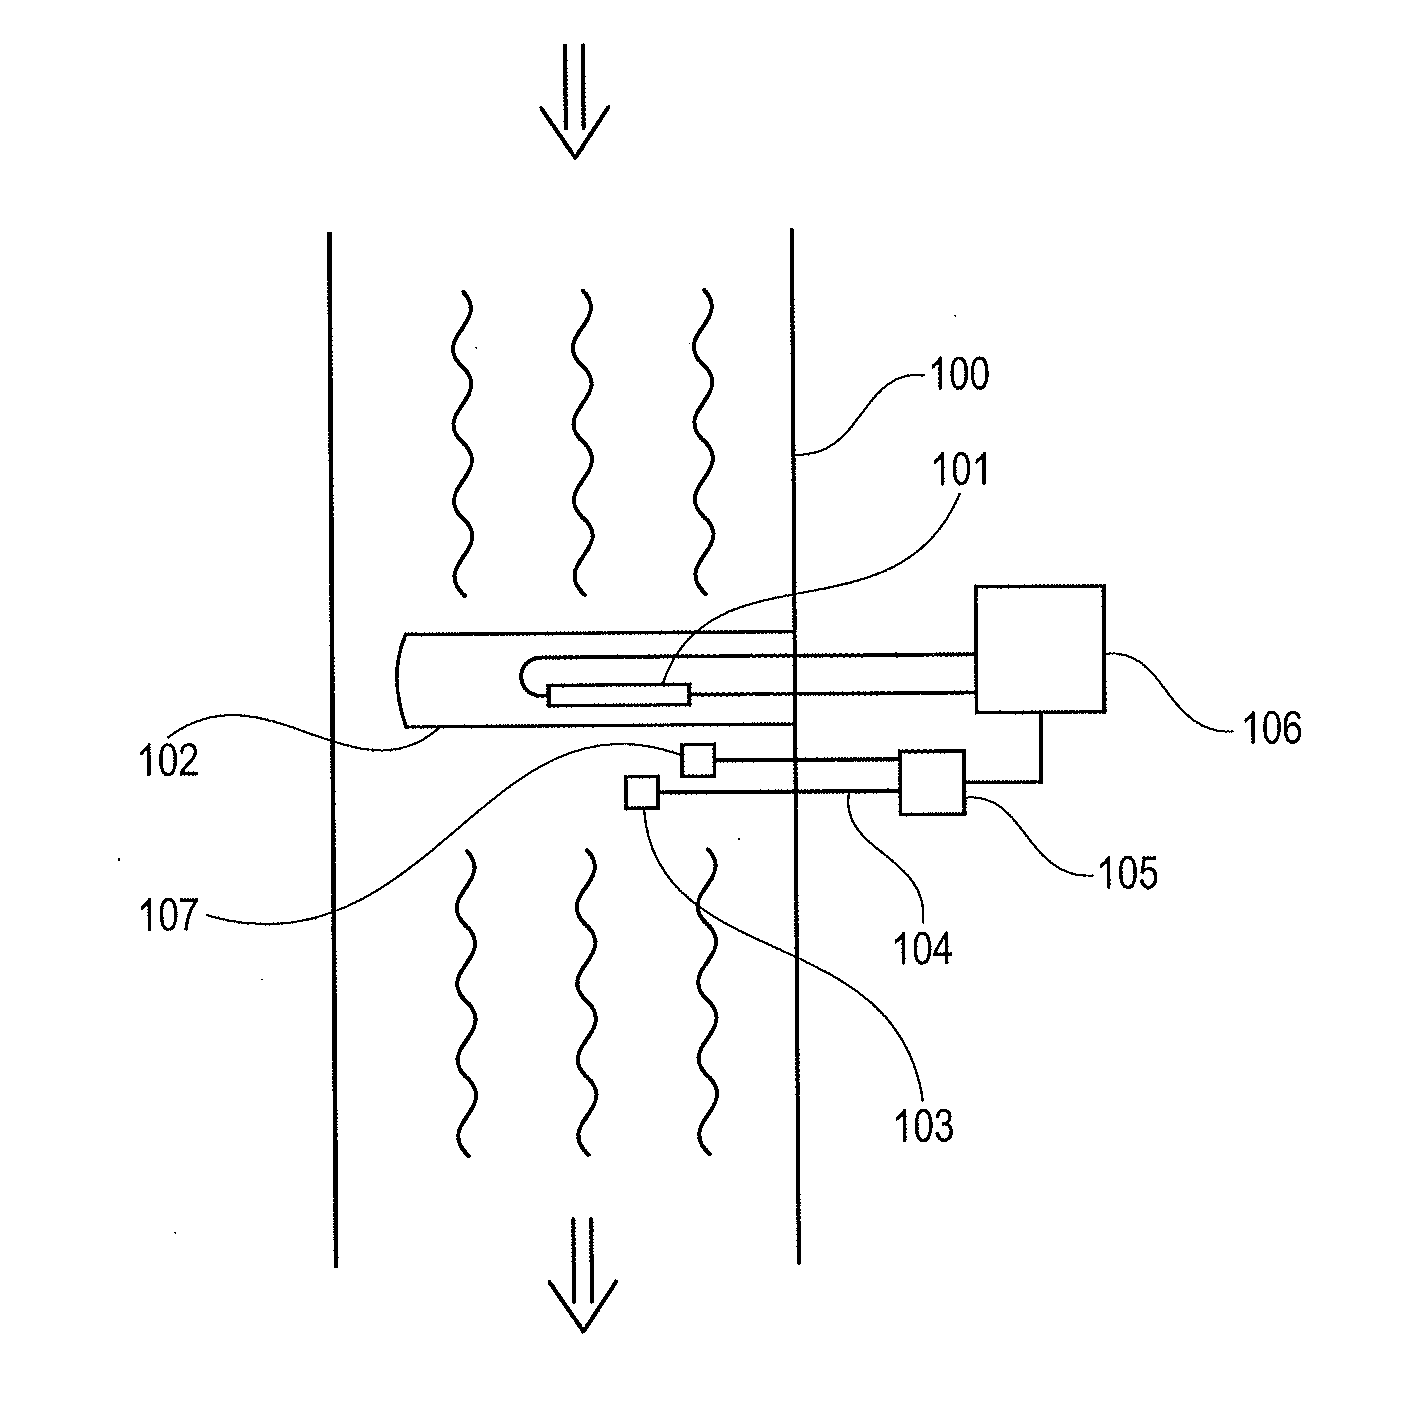 Control device for a UV-disinfecting system with broadband UV emitters